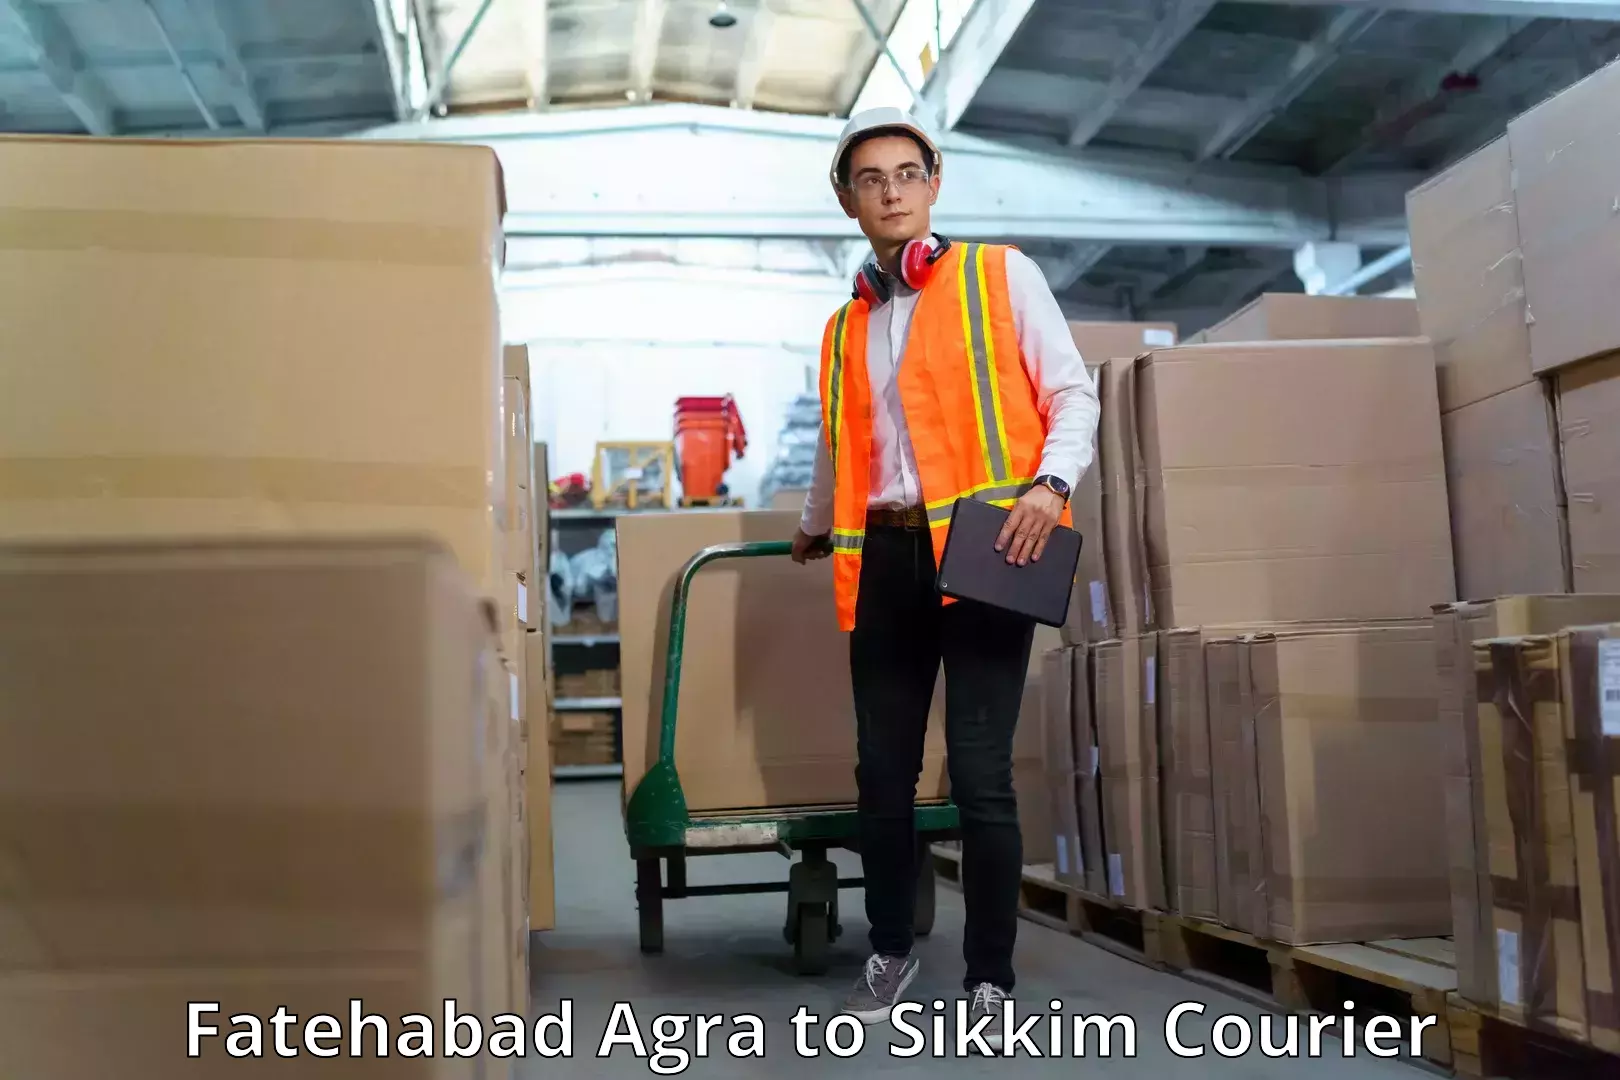 Cargo delivery service Fatehabad Agra to Sikkim